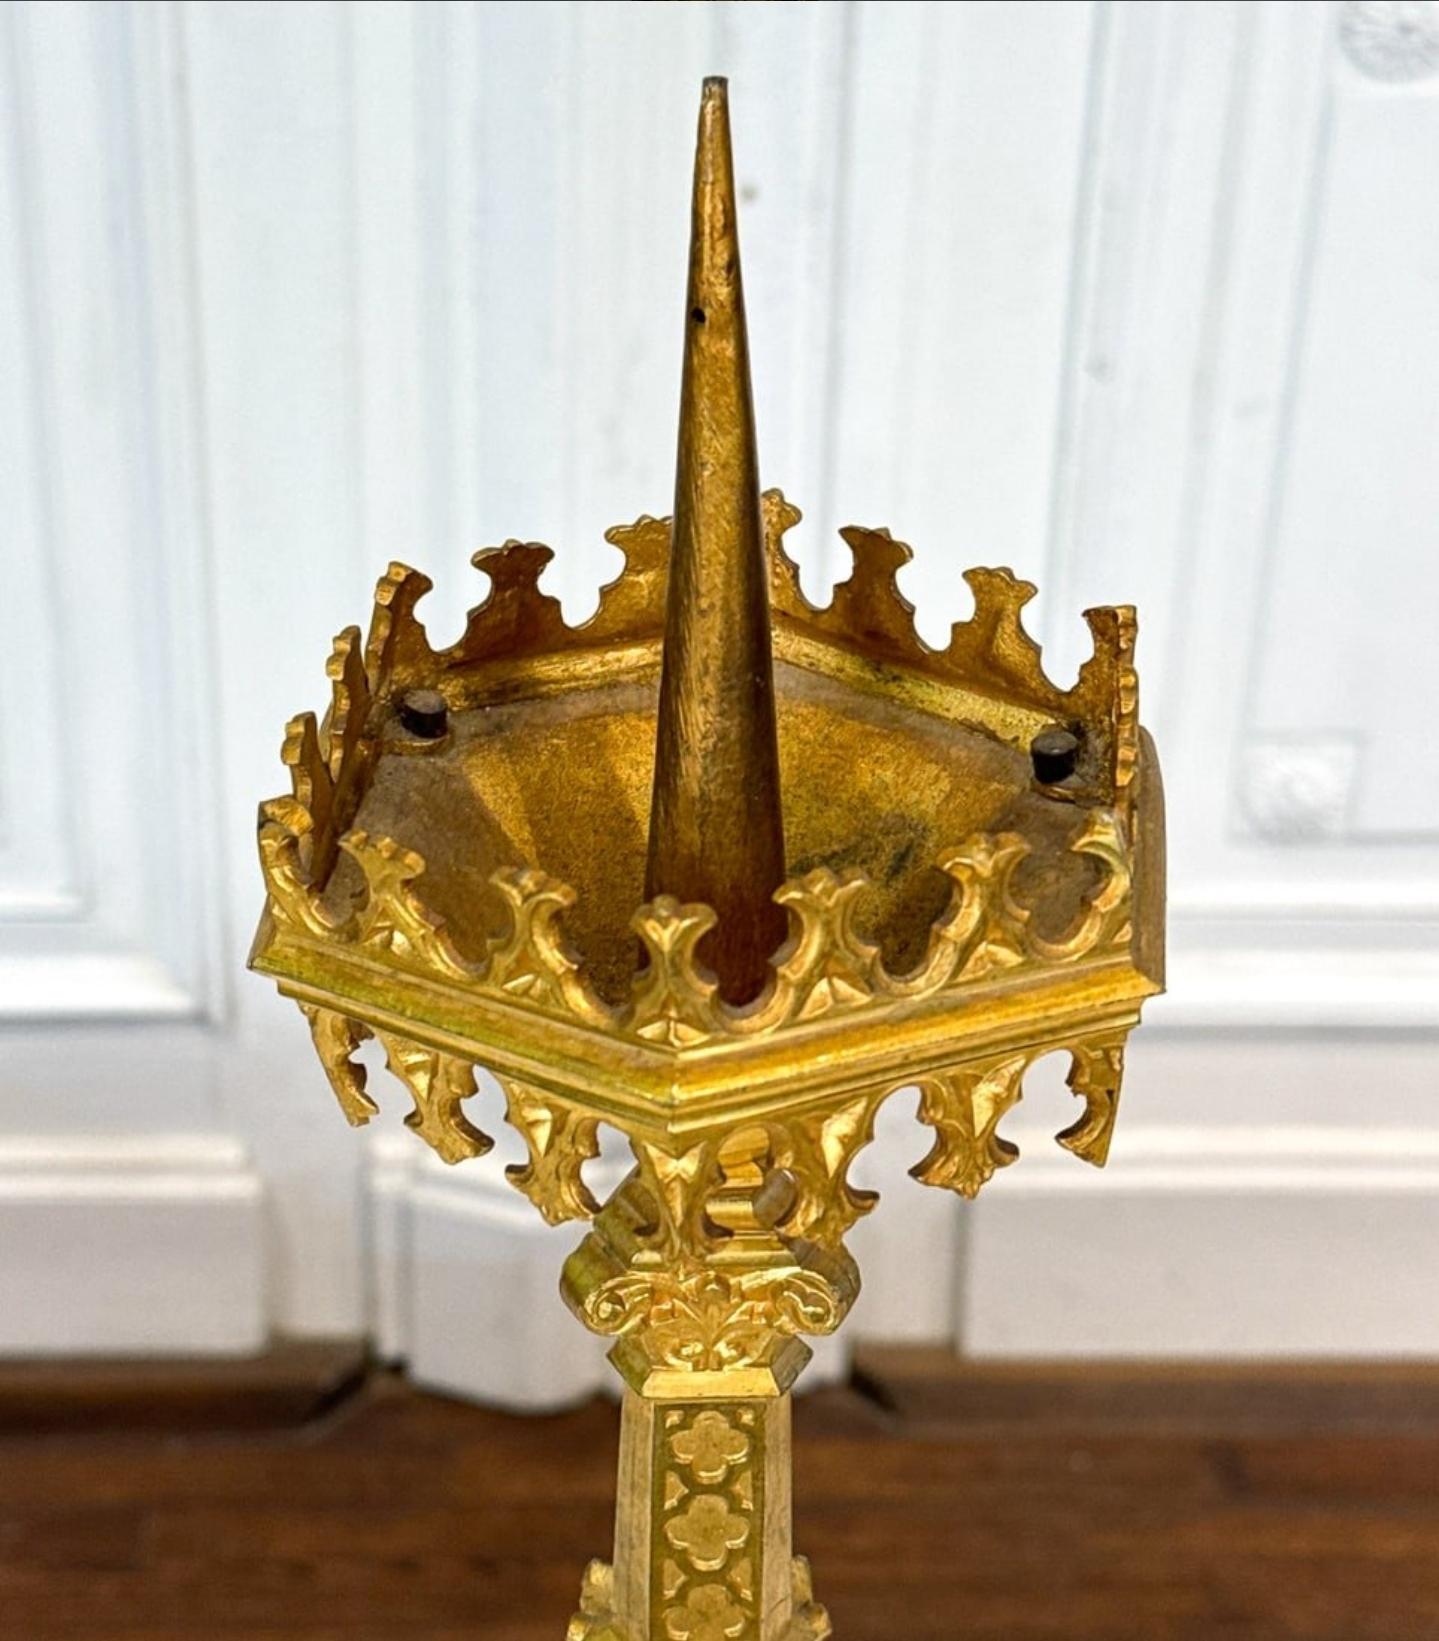 Antique Neo-Gothic Gilt Bronze Pricket Candlestick  In Good Condition For Sale In Forney, TX